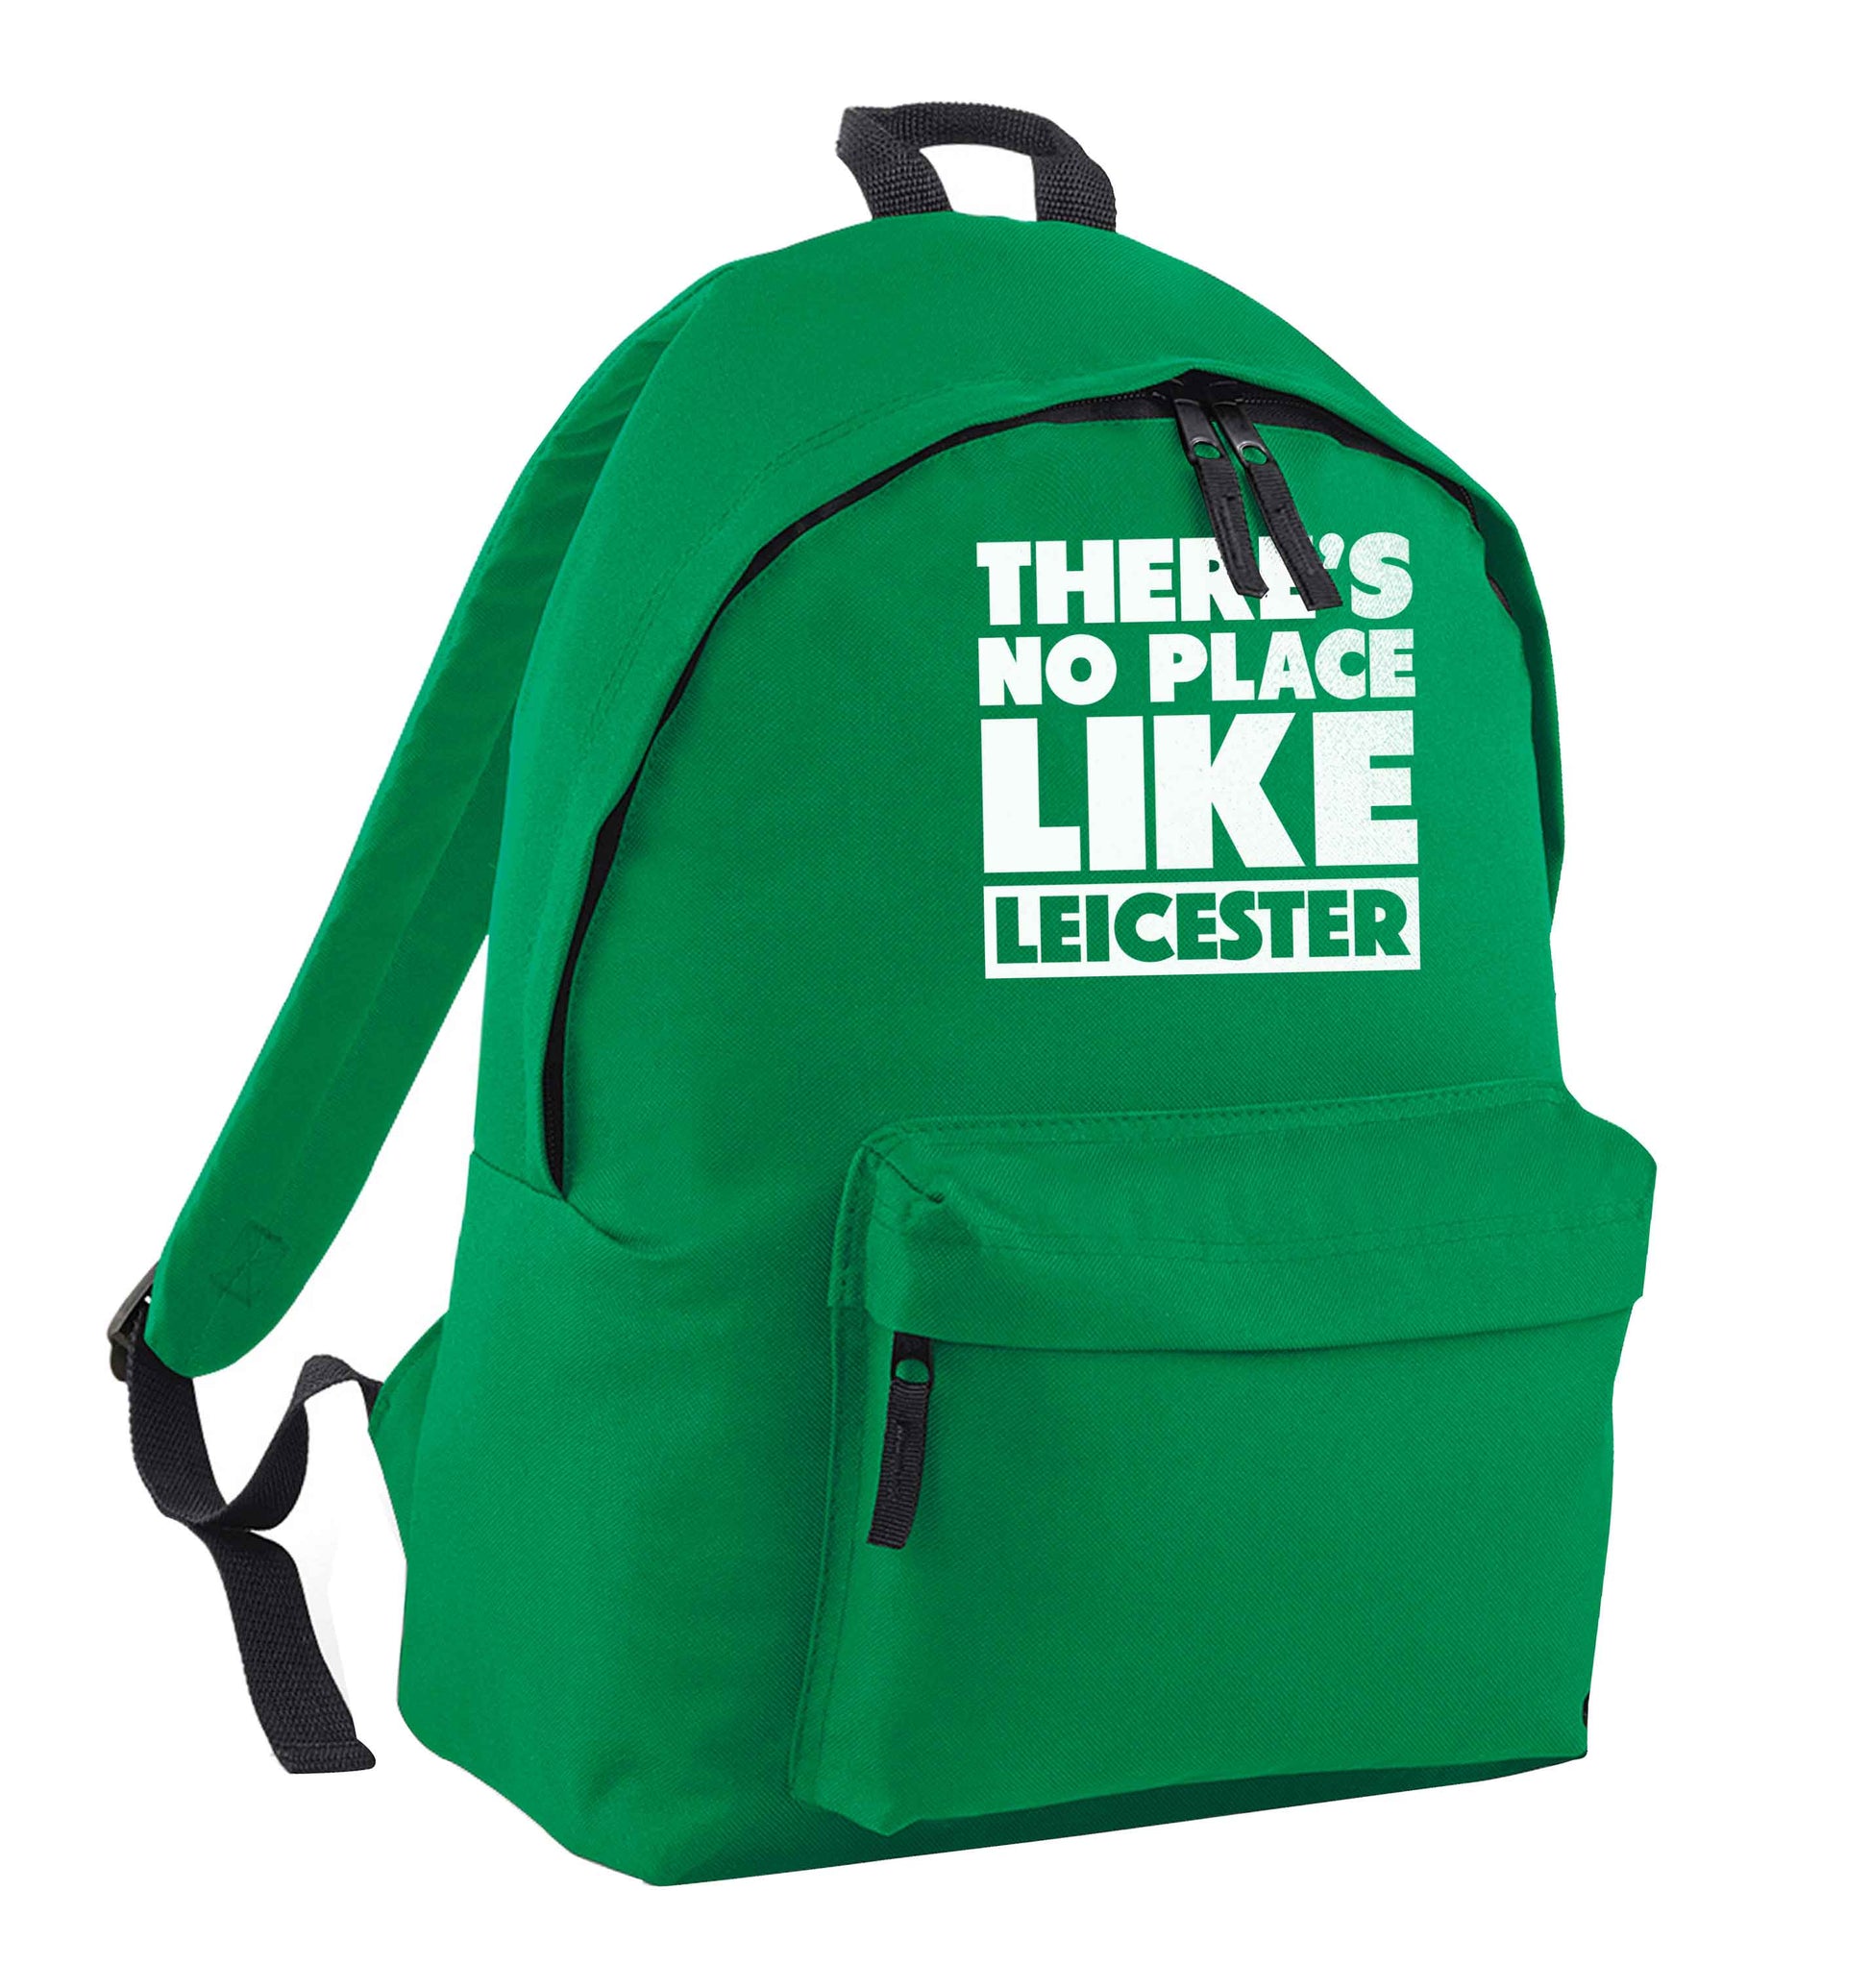 There's no place like Leicester green adults backpack